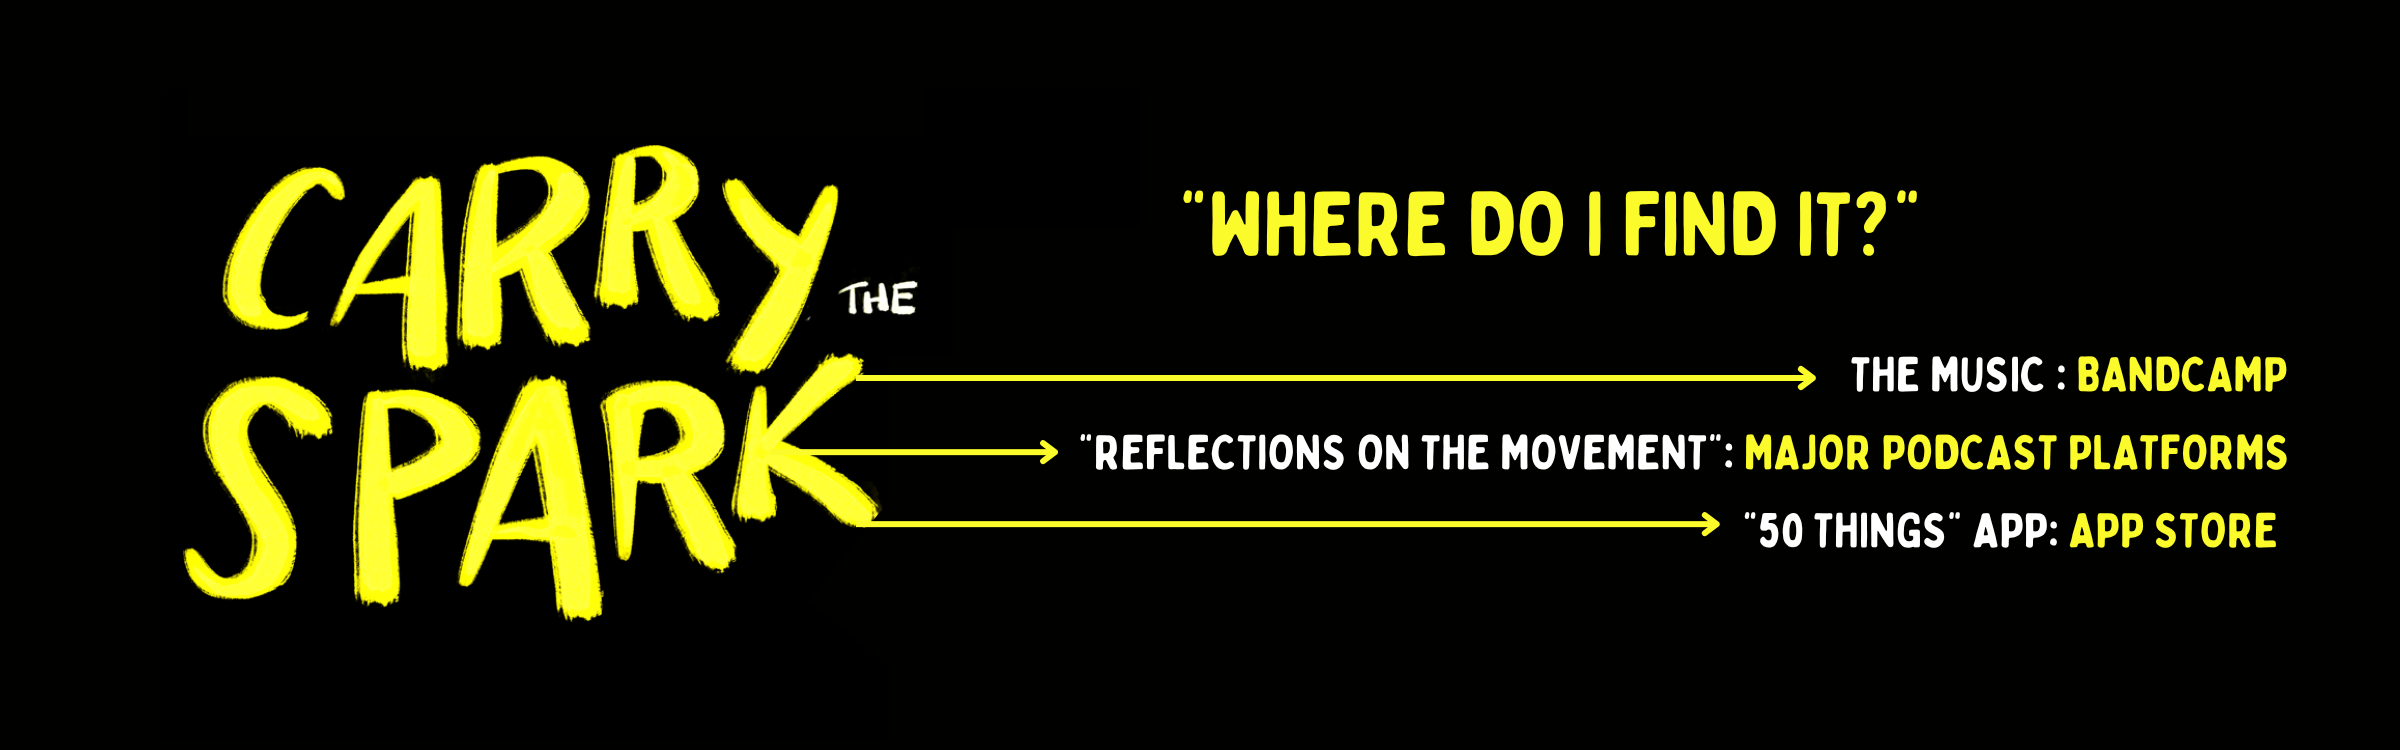 Yellow text on a dark grey background reads: "CARRY THE SPARK: WHERE DO I FIND IT?" with yellow arrows pointing to three lines of text. They read: 'the music: bandcamp. 'reflections on the movement: major podcast playforms', and '50 Things APP: the app store" 